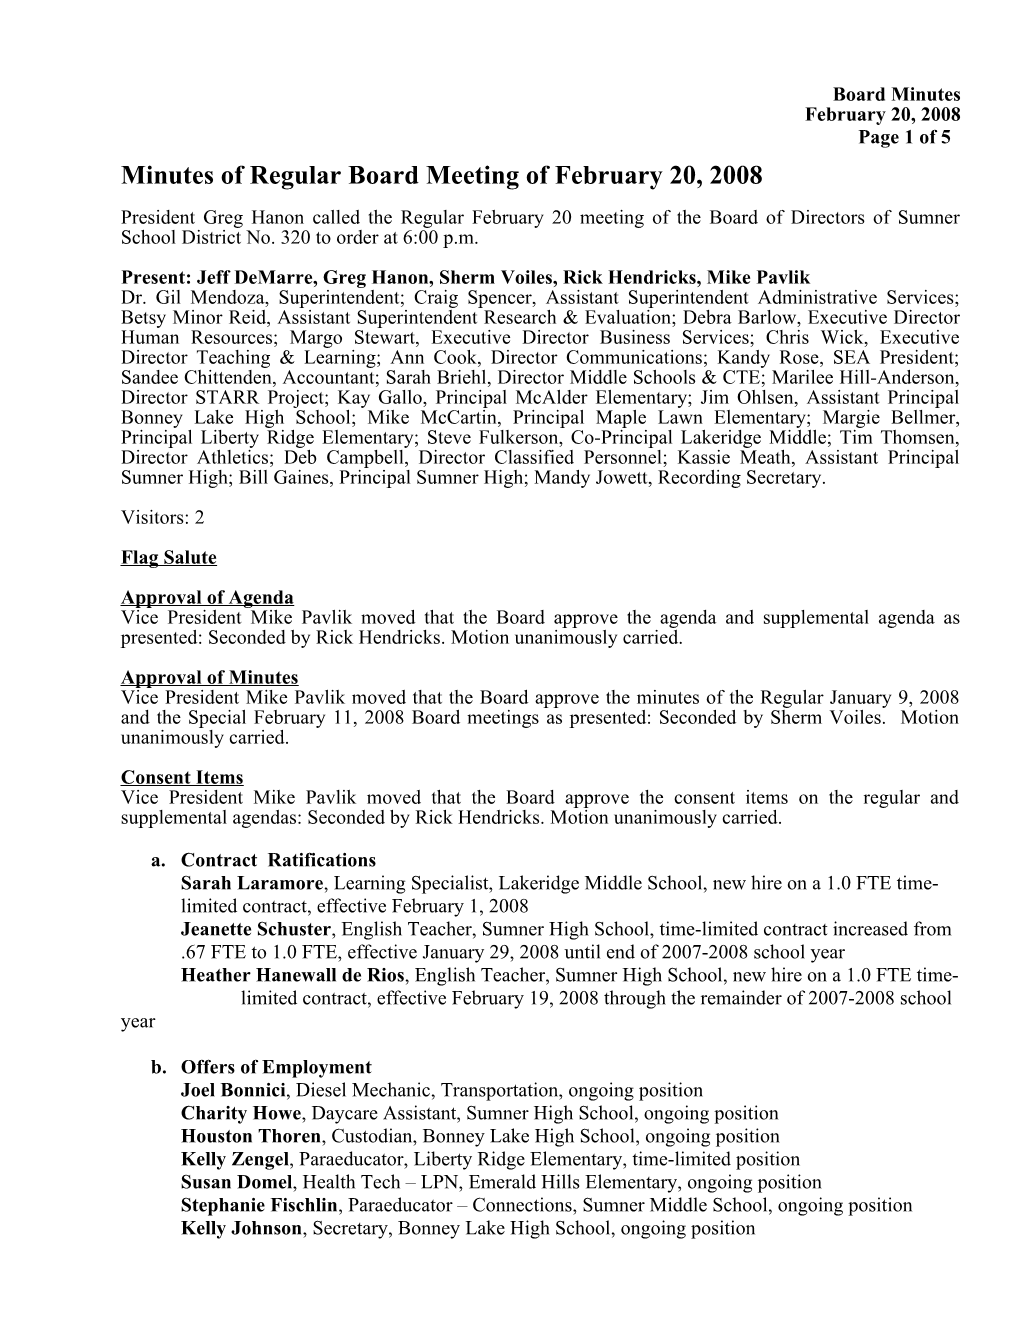 Minutes of Regular Board Meeting of February 20, 2008